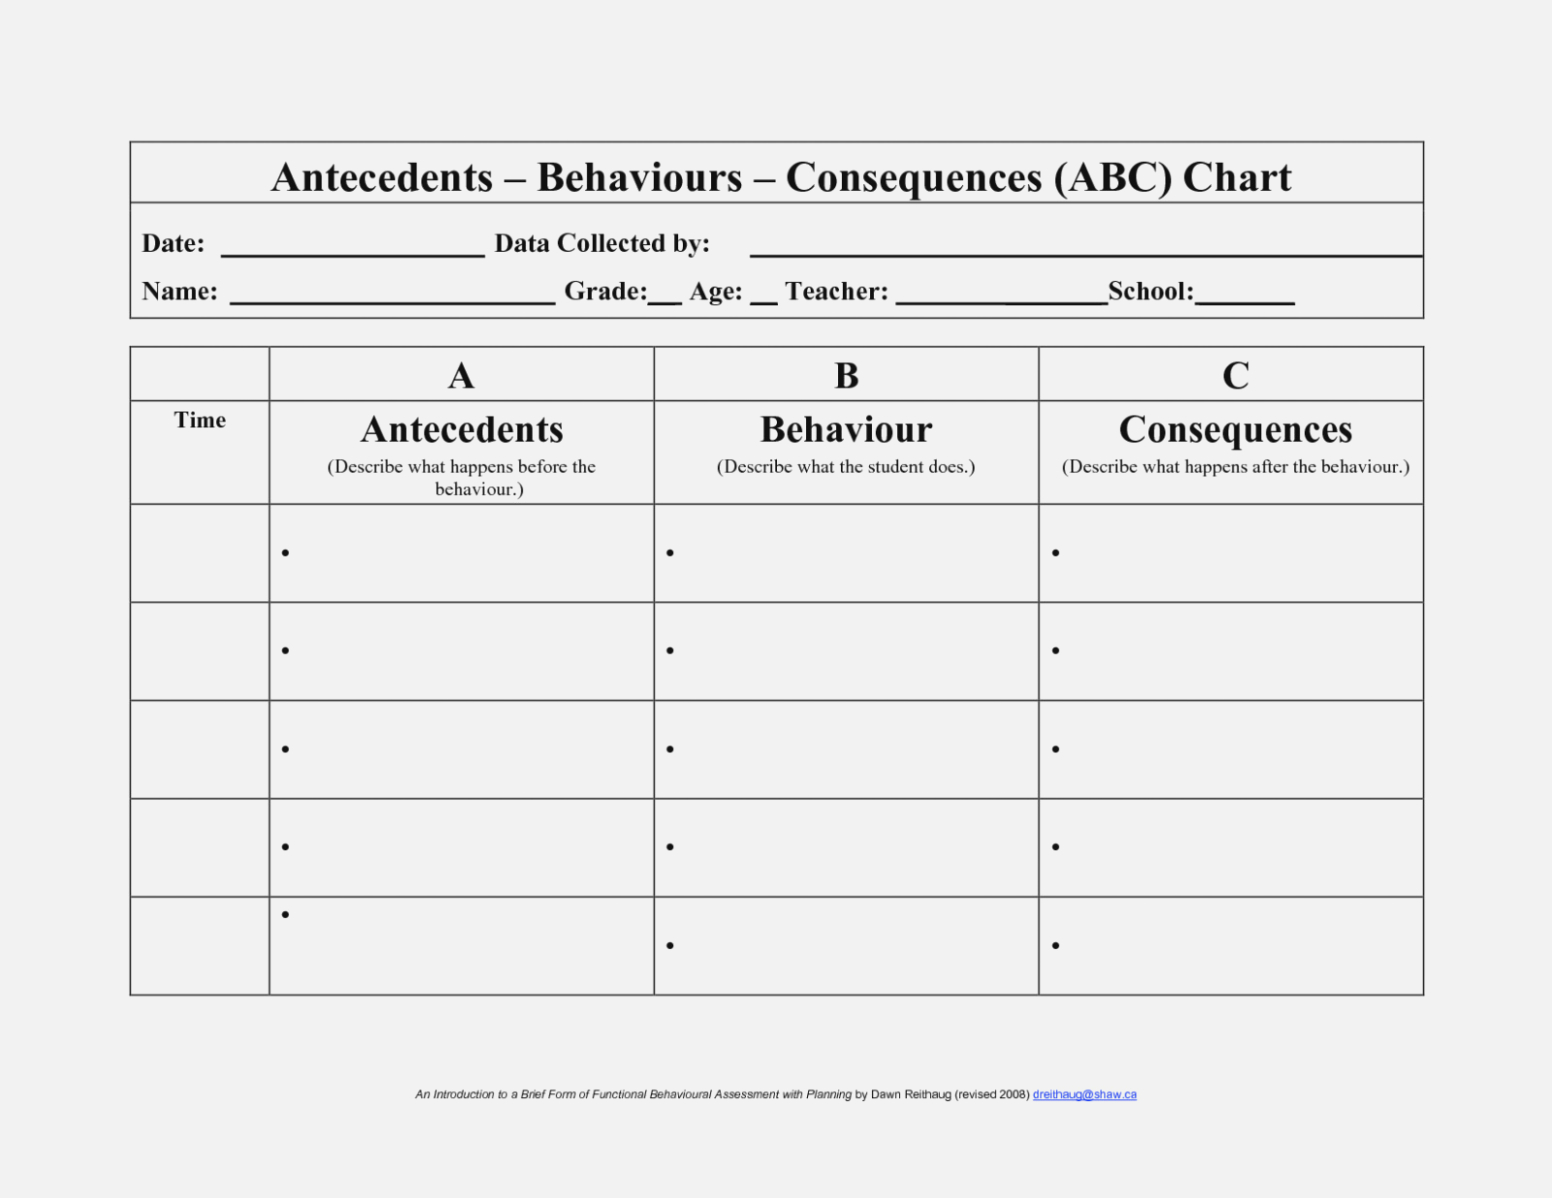 Free Printable Data Collection Forms - 18.10.hus-Noorderpad.de • - Free Printable Data Sheets